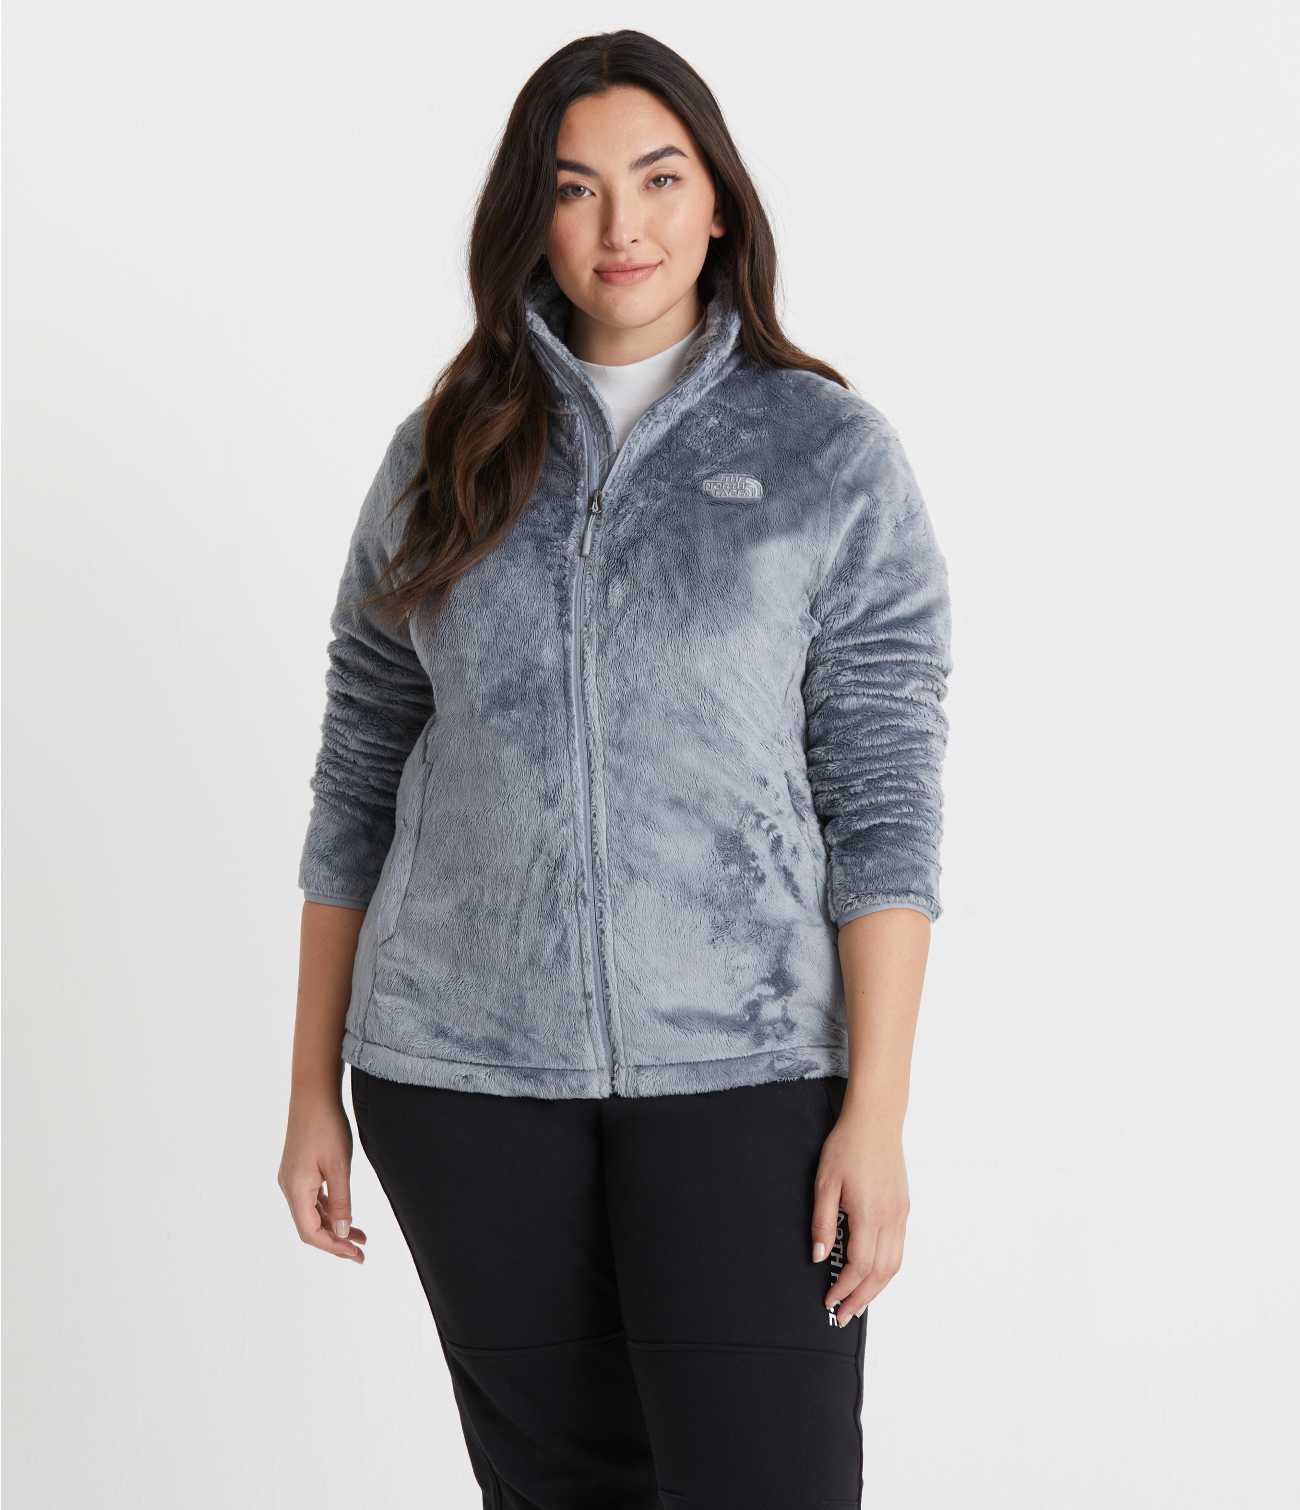 WOMEN'S OSITO JACKET, The North Face